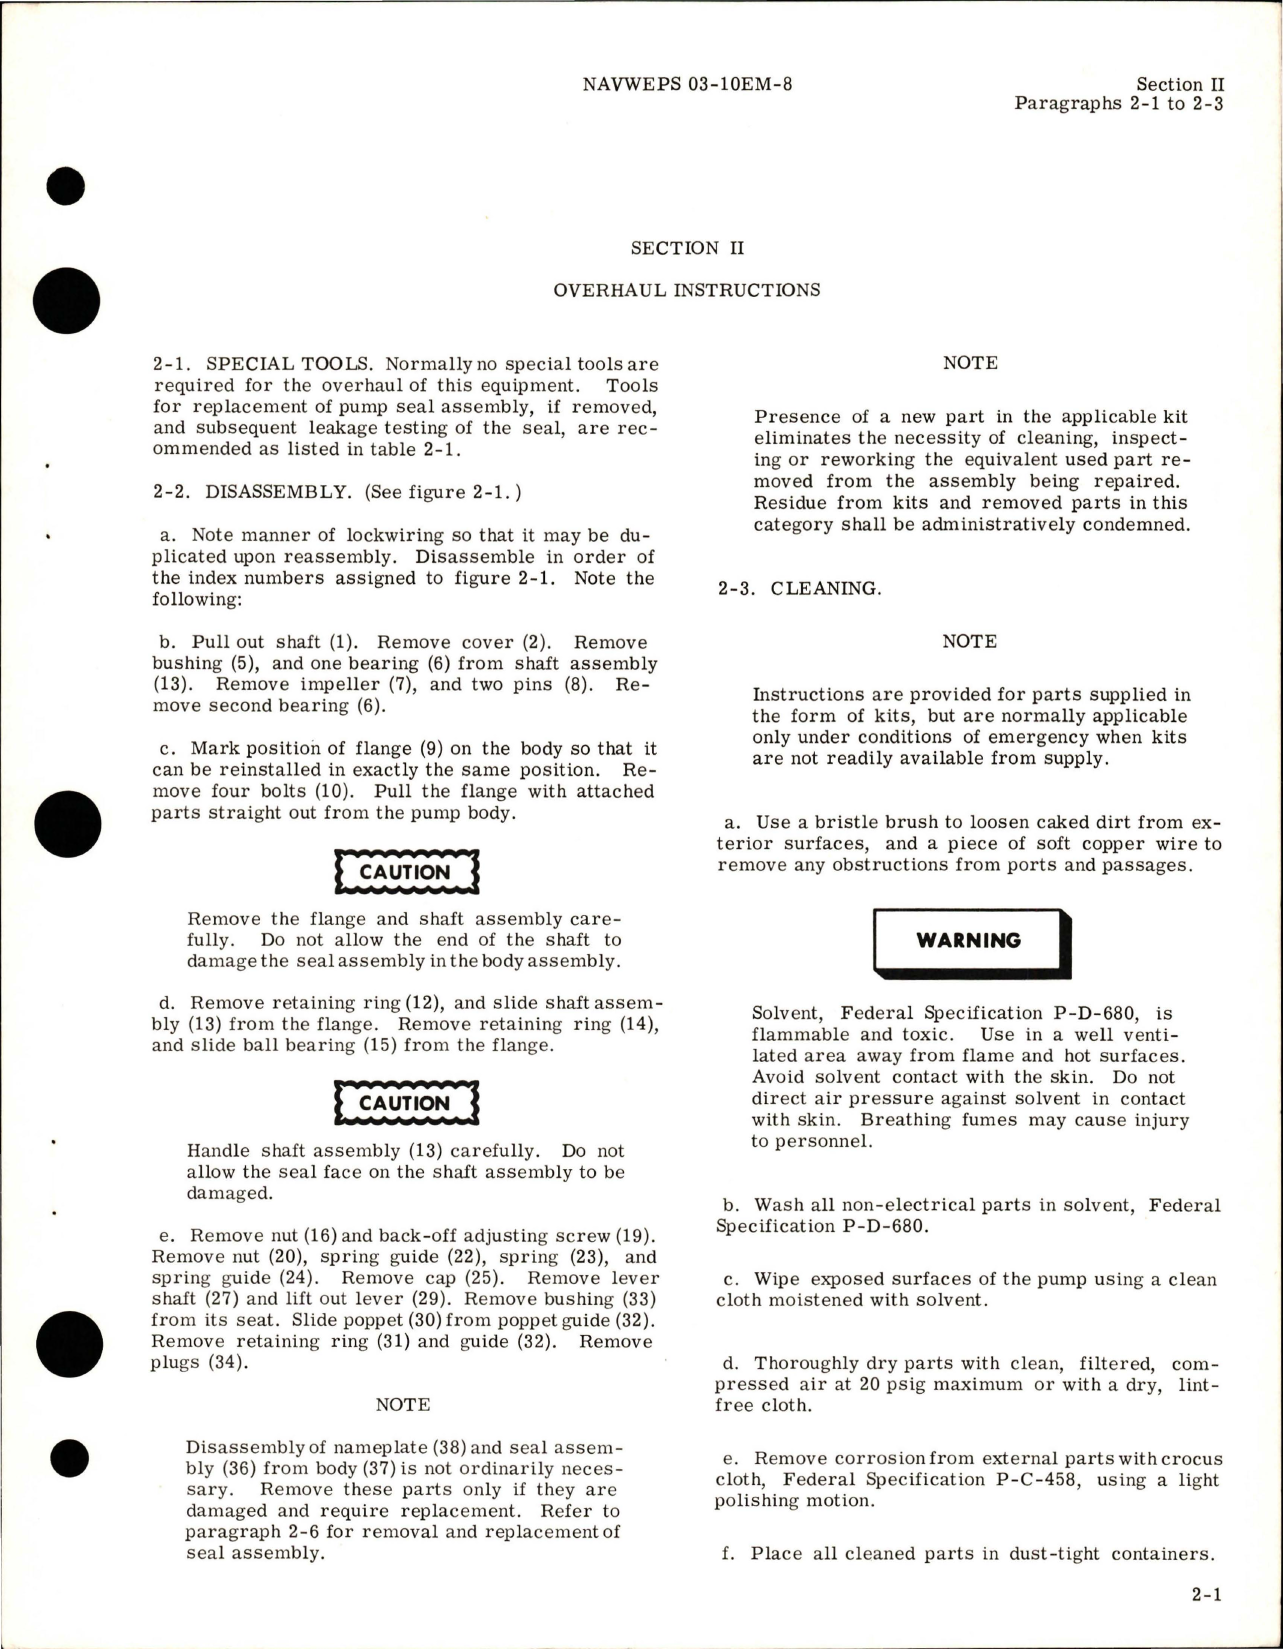 Sample page 5 from AirCorps Library document: Overhaul Instructions for Engine Driven Fuel Boost Pump - Part 23900 and 50138